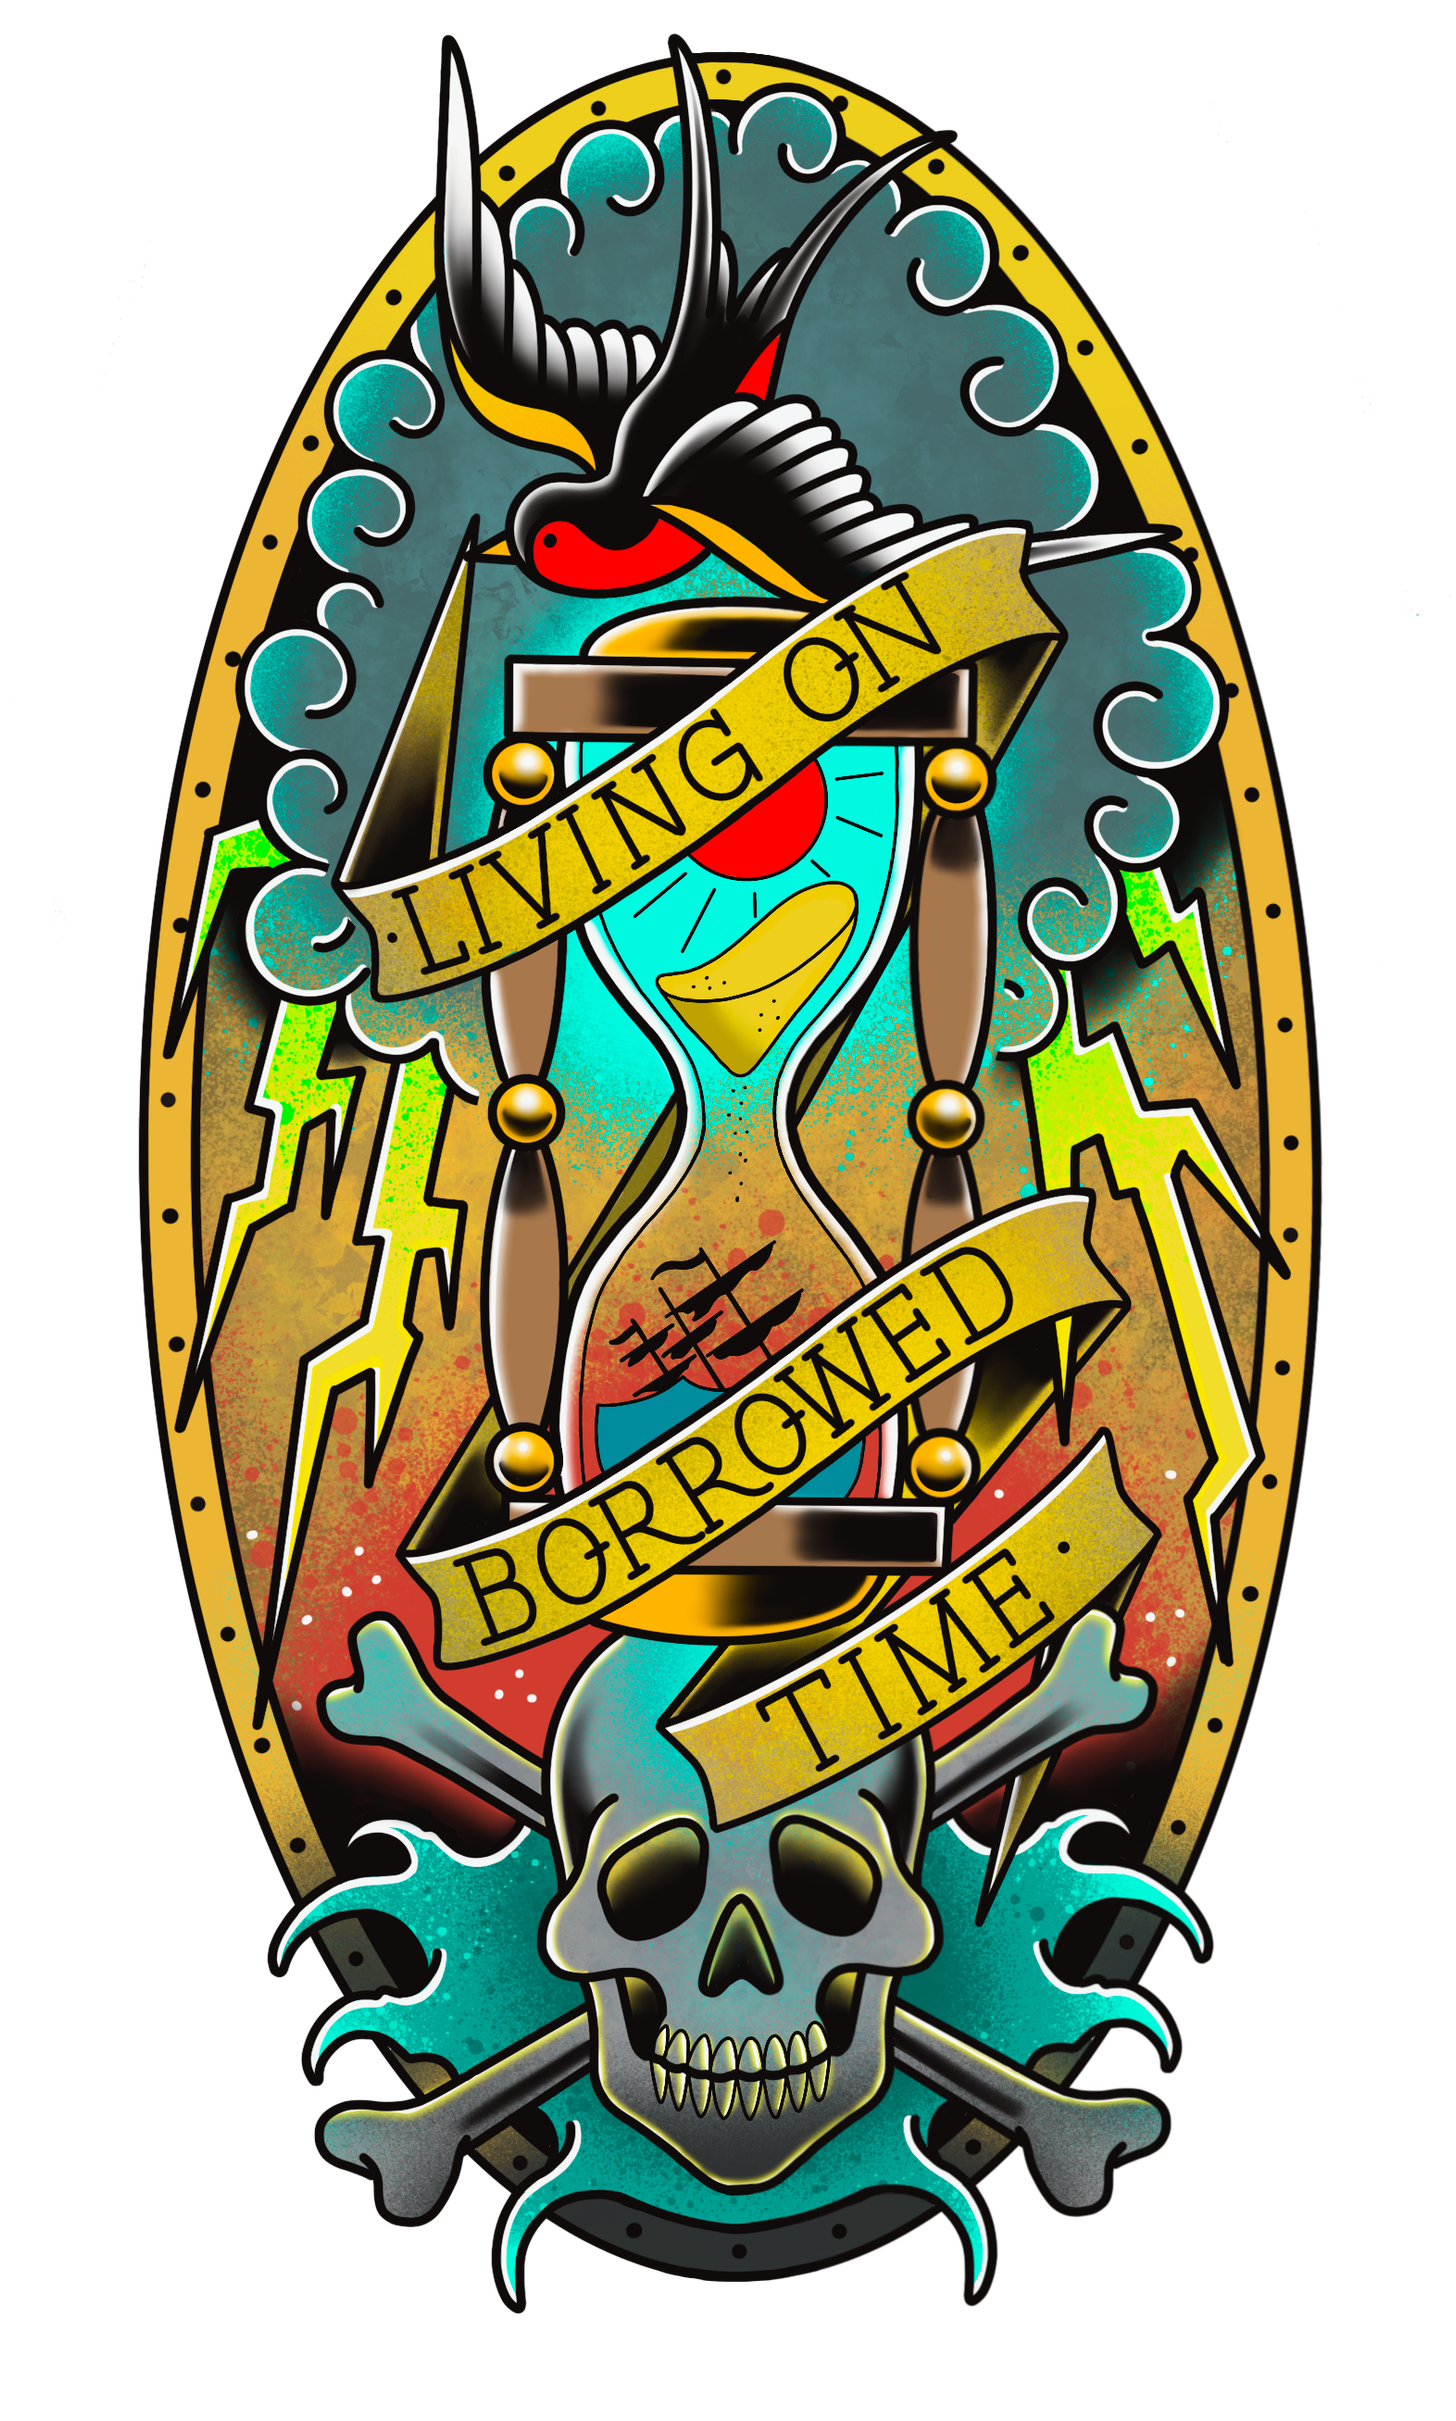 An American traditional tattoo piece featuring an hourglass containing a sinking ship, a skull and crossbones, and a robin carrying a banner that says "Living on Borrowed Time". All is contained in an oval frame.